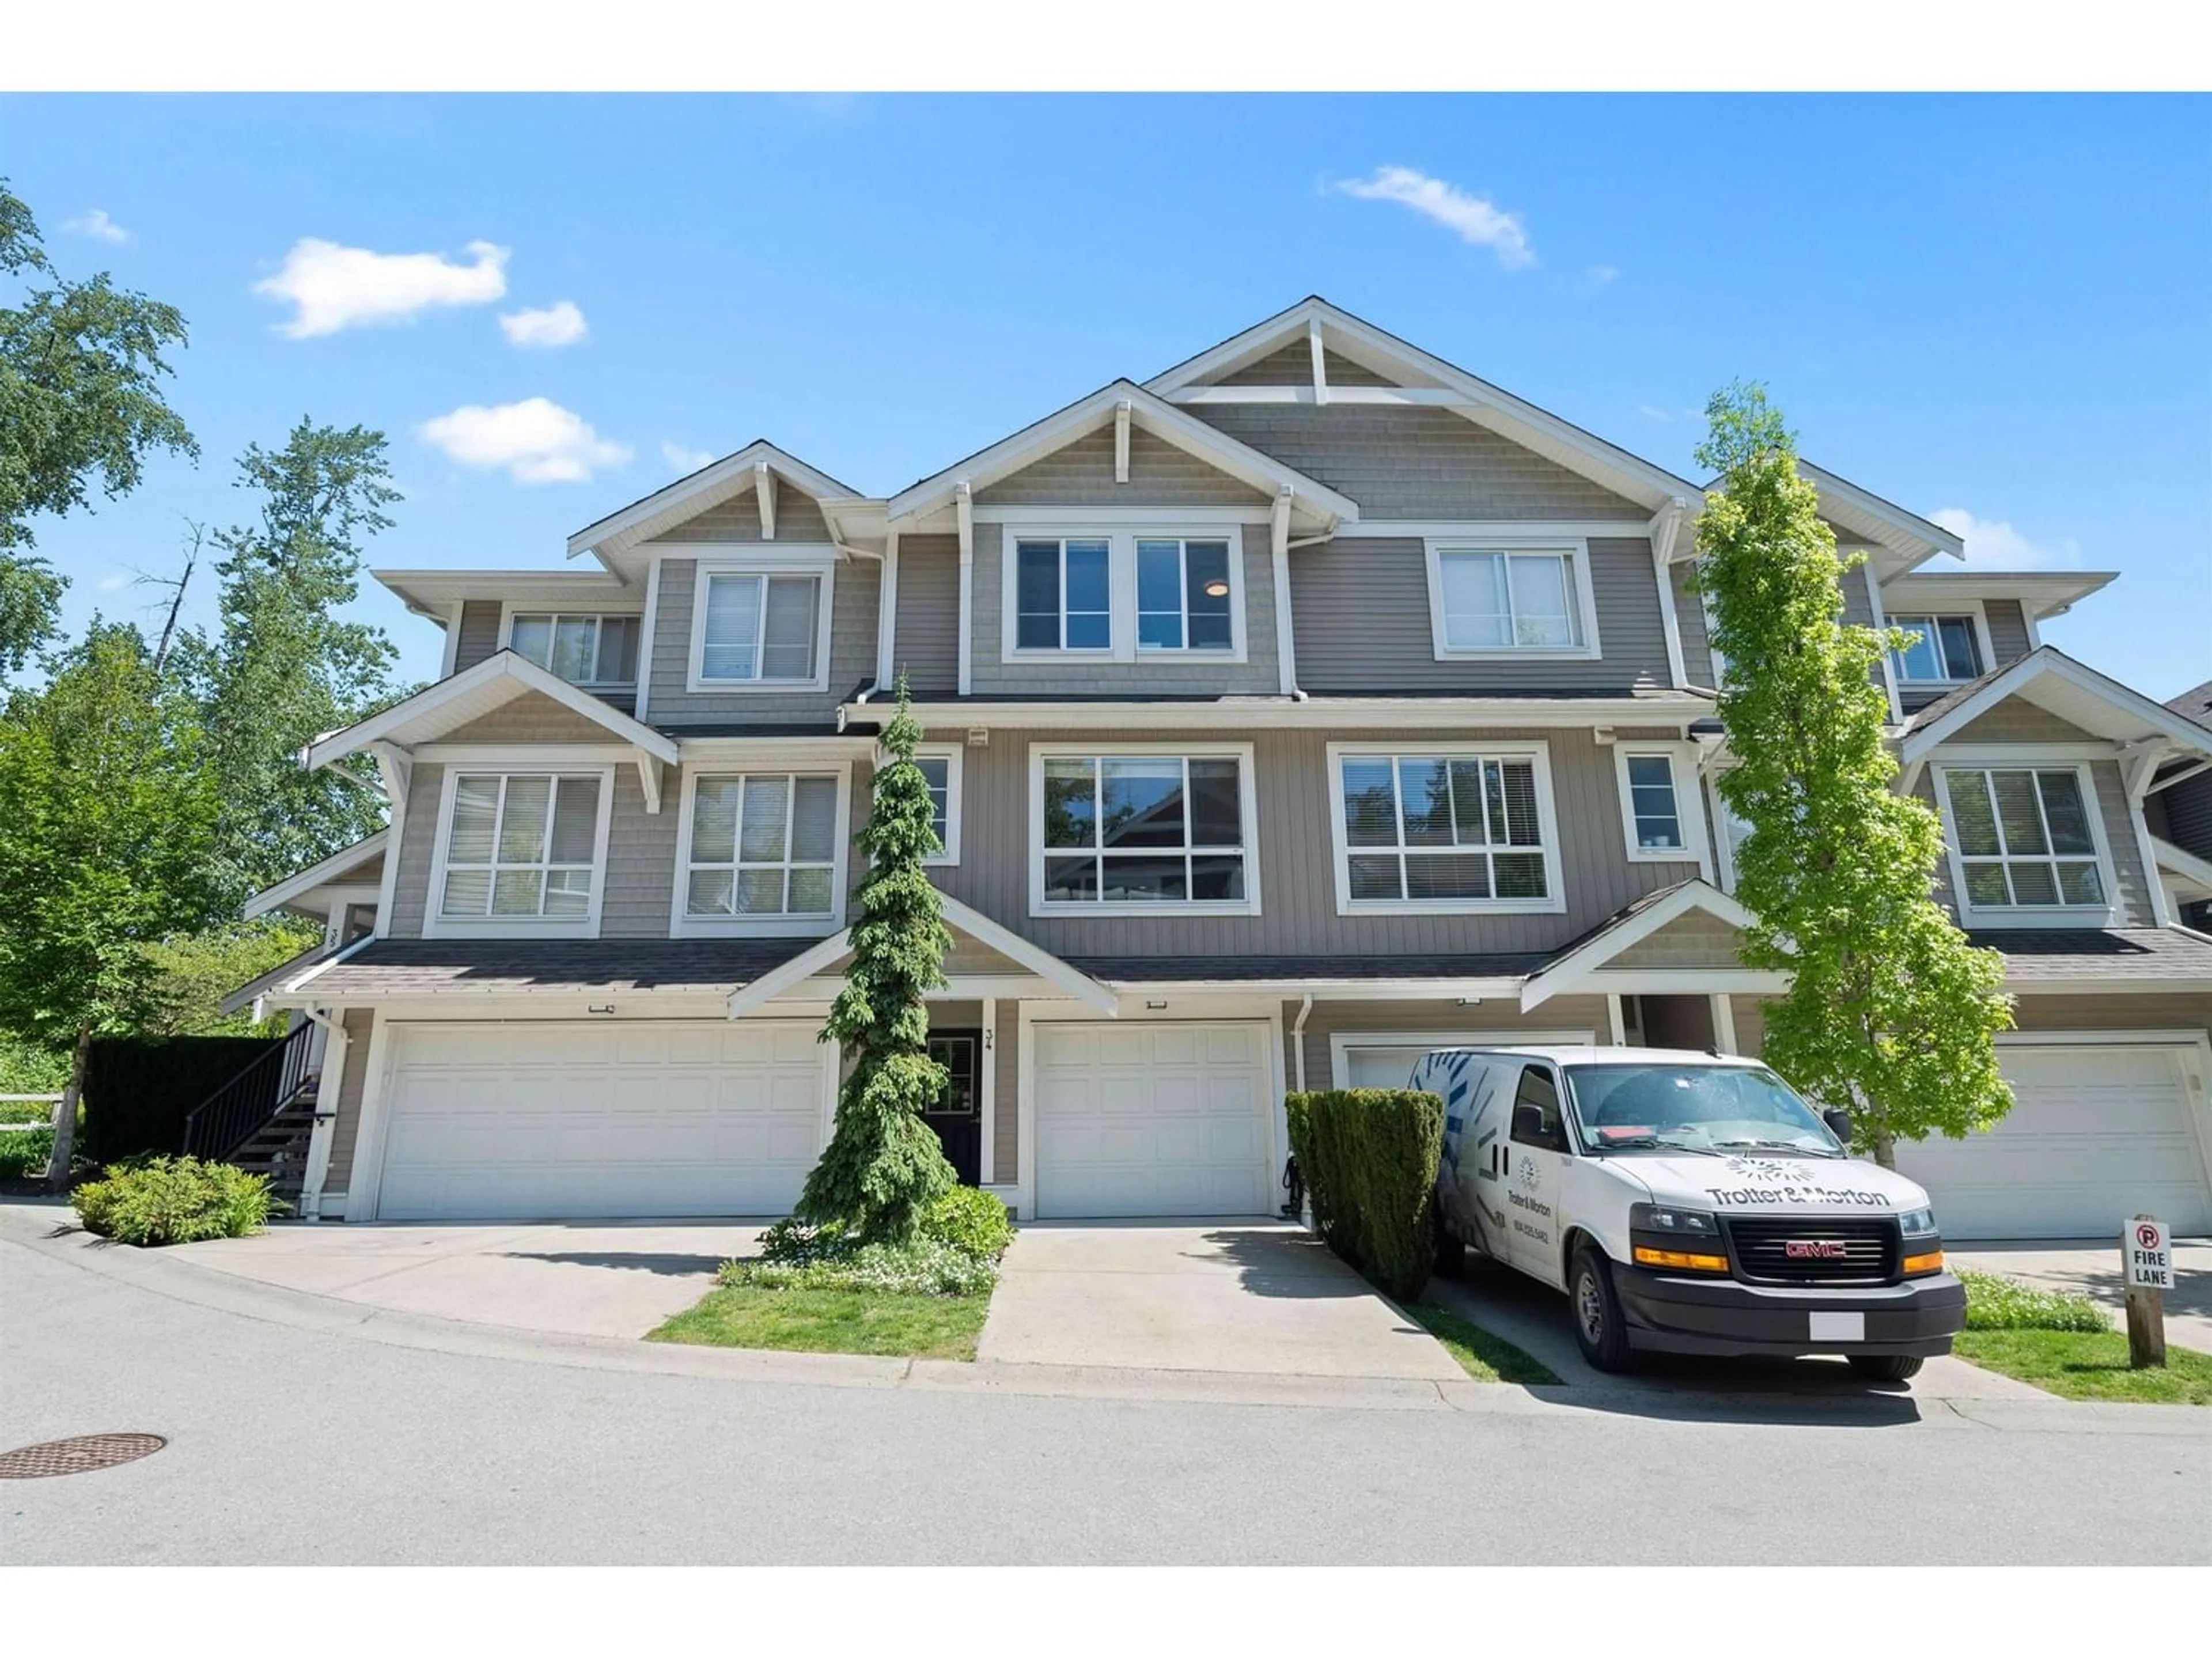 A pic from exterior of the house or condo for 34 7059 210 STREET, Langley British Columbia V2Y0T2